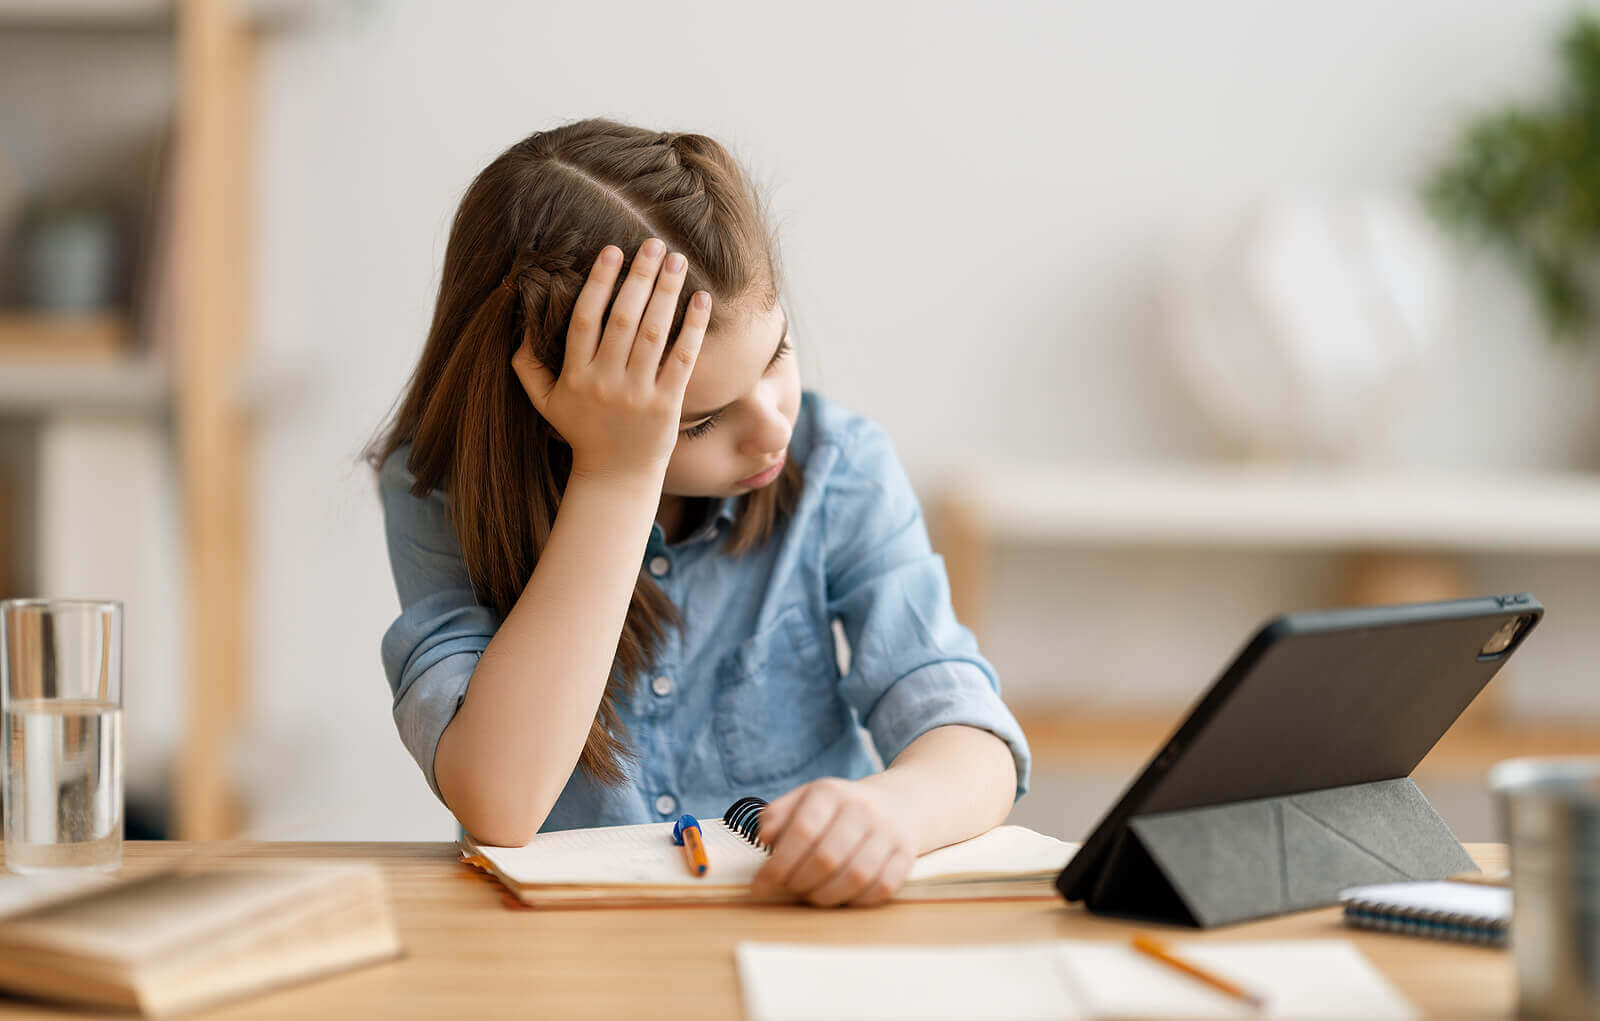 can you refuse homework for your child